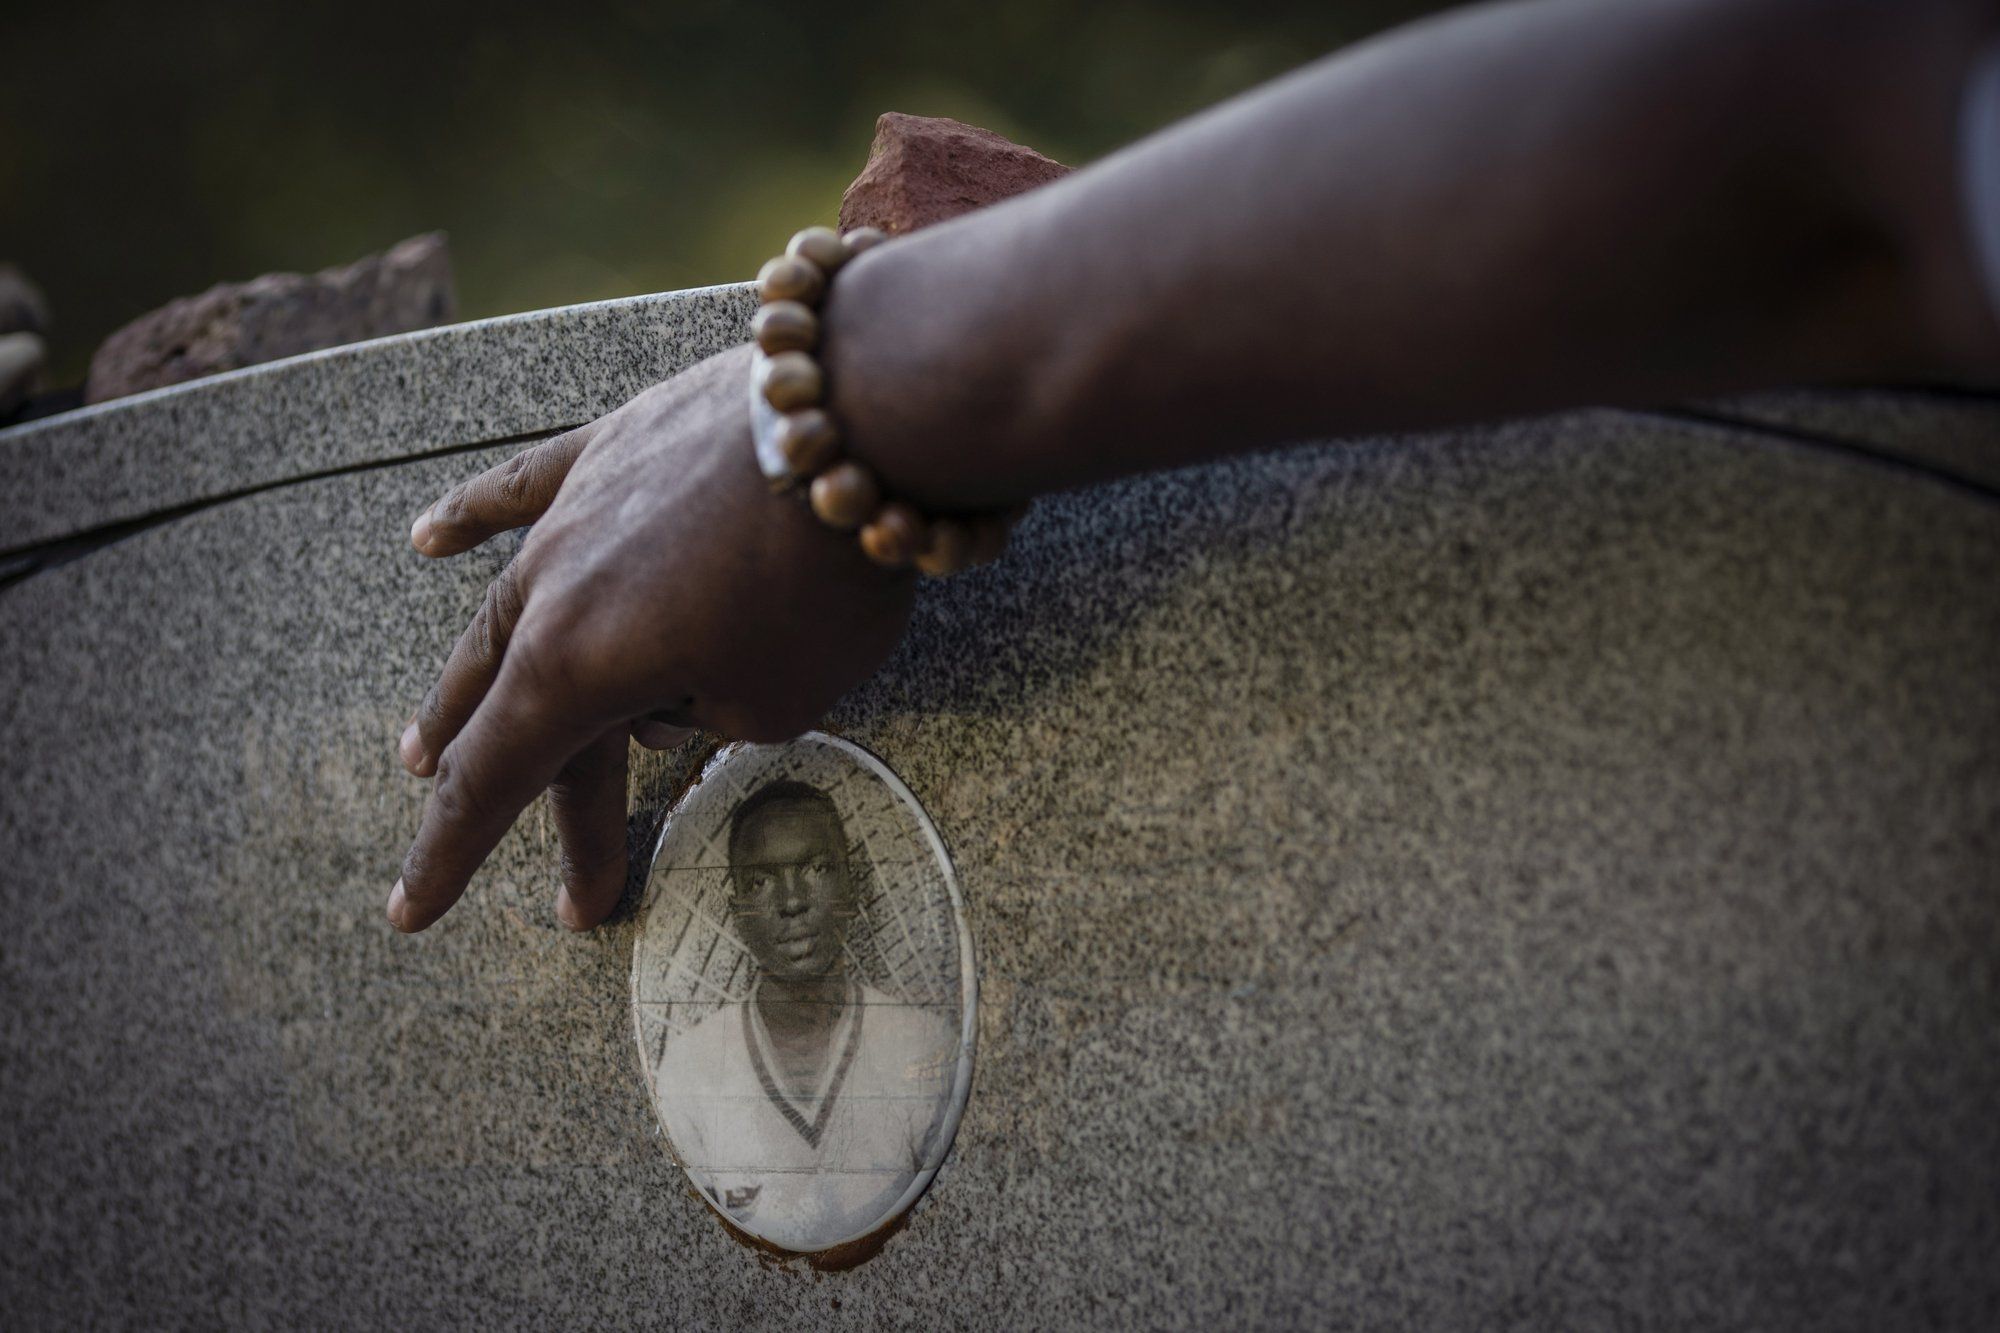 A portrait of James Chaney is seen on the headstone of his grave in Meridian, Miss., Saturday, Oct. 3, 2020. Chaney was one of three civil rights activists that was kidnapped by a deputy sheriff and local Klansmen, and driven to a narrow country road and shot at close range. Their bodies, buried in an earthen dam, were found 44 days later. Image by Wong Maye-E / The Associated Press. United States, 2020.